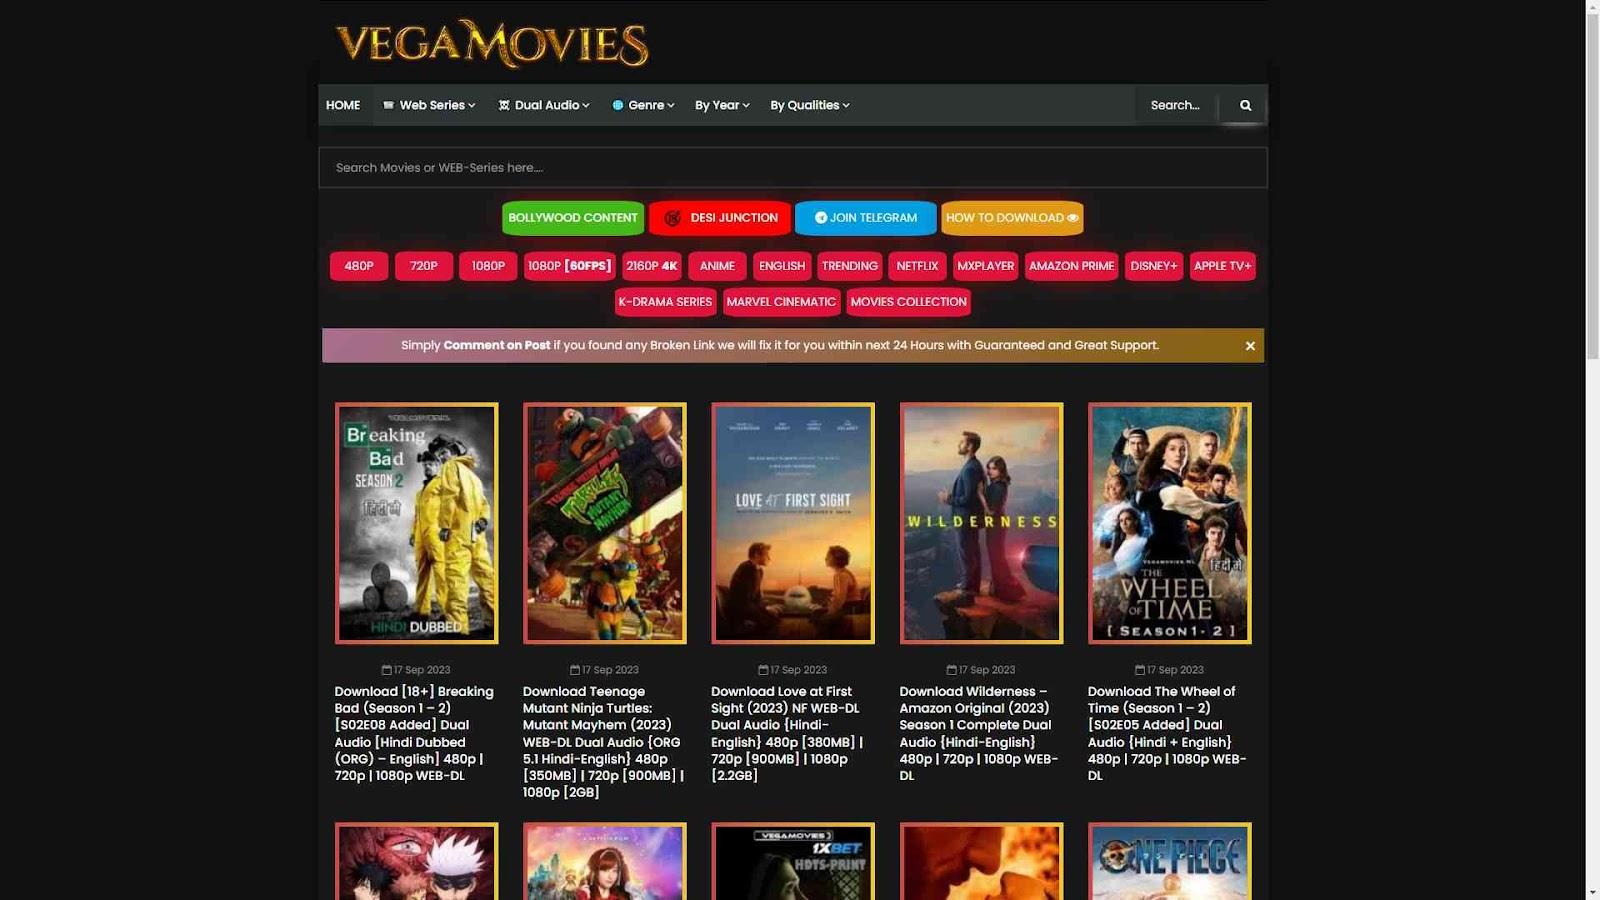 Vegamovies: The Diverse Content Library